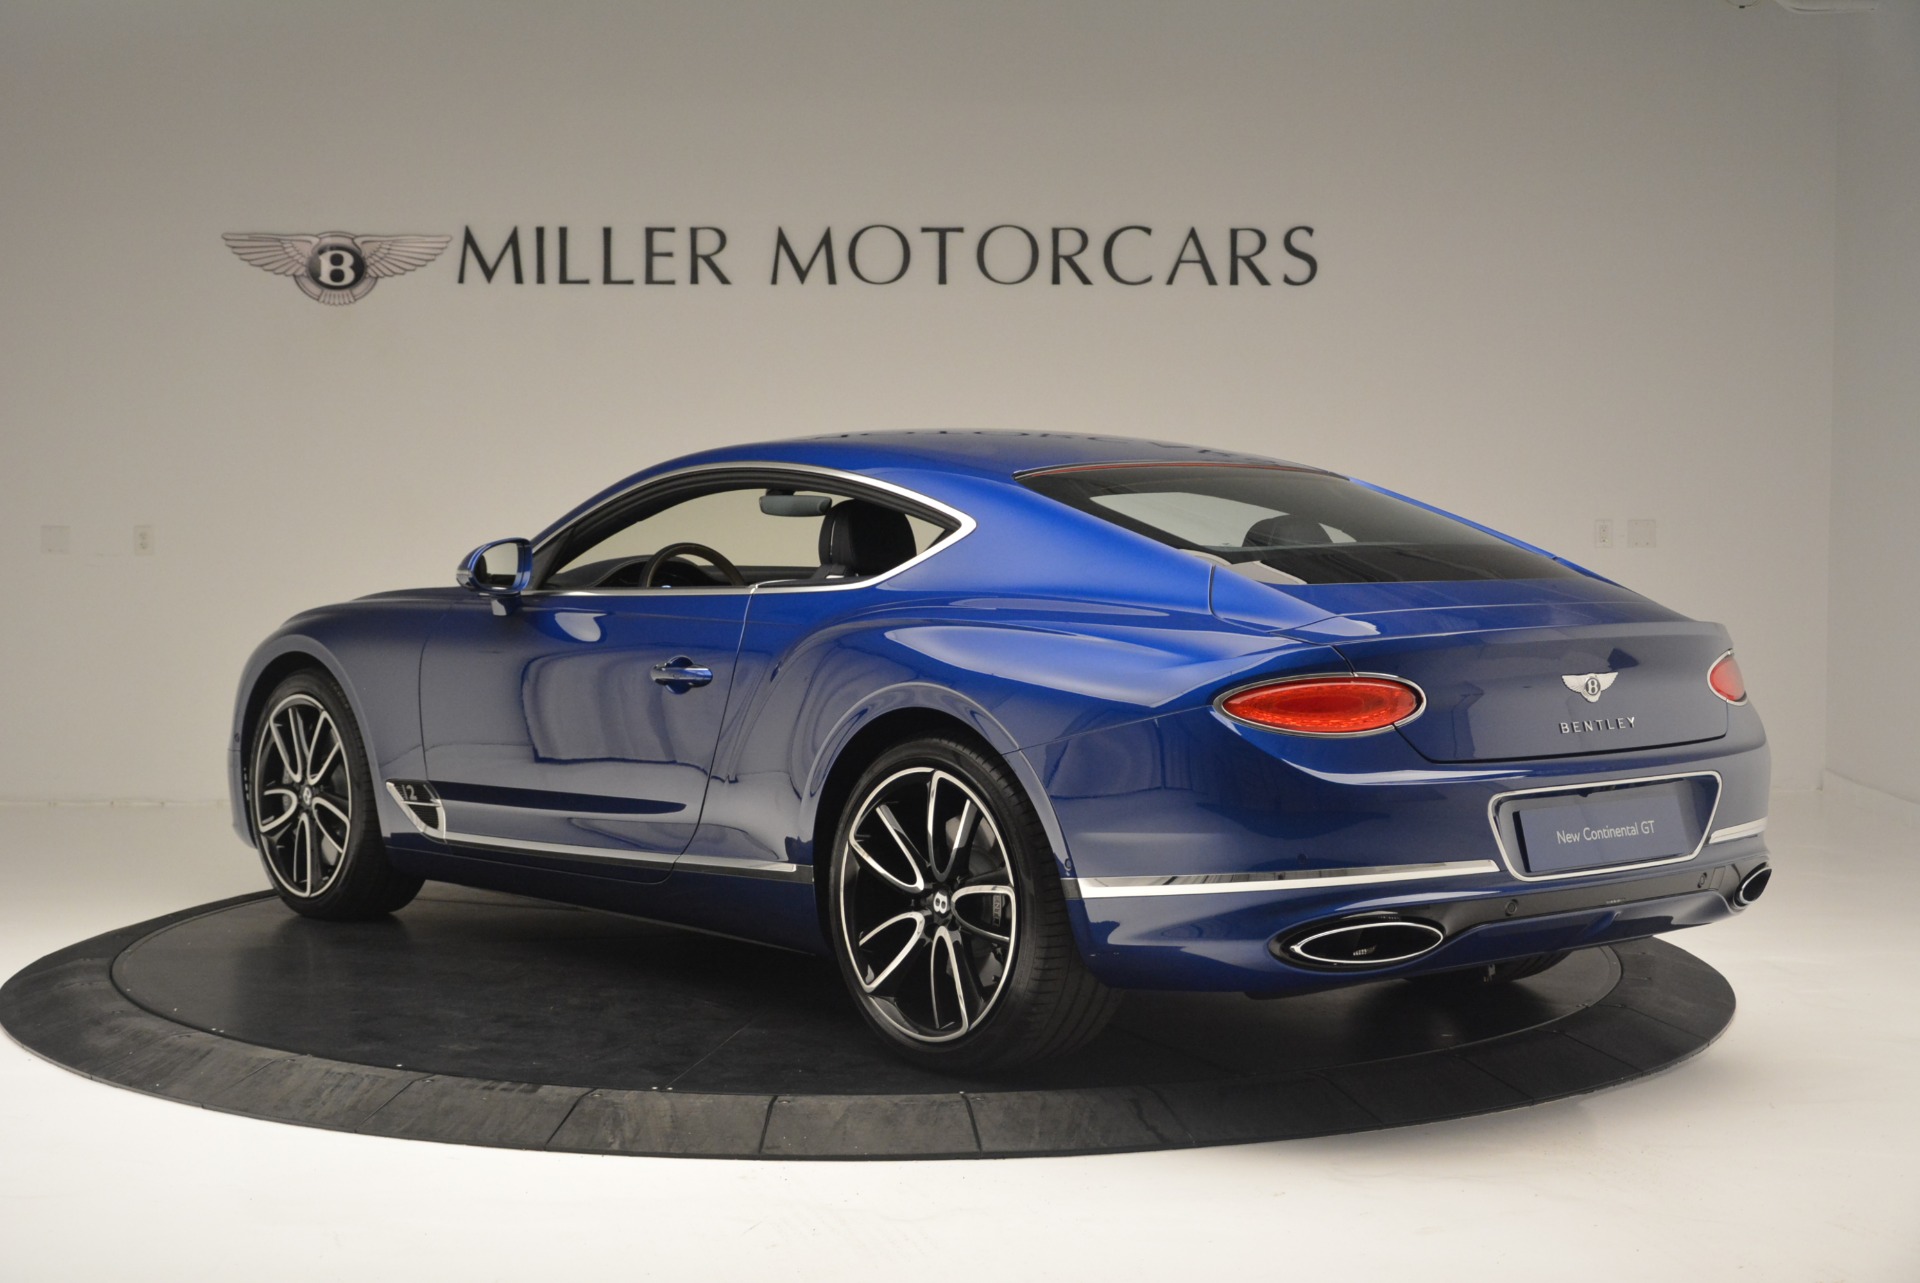 New 2020 Bentley Continental Gt For Sale Miller